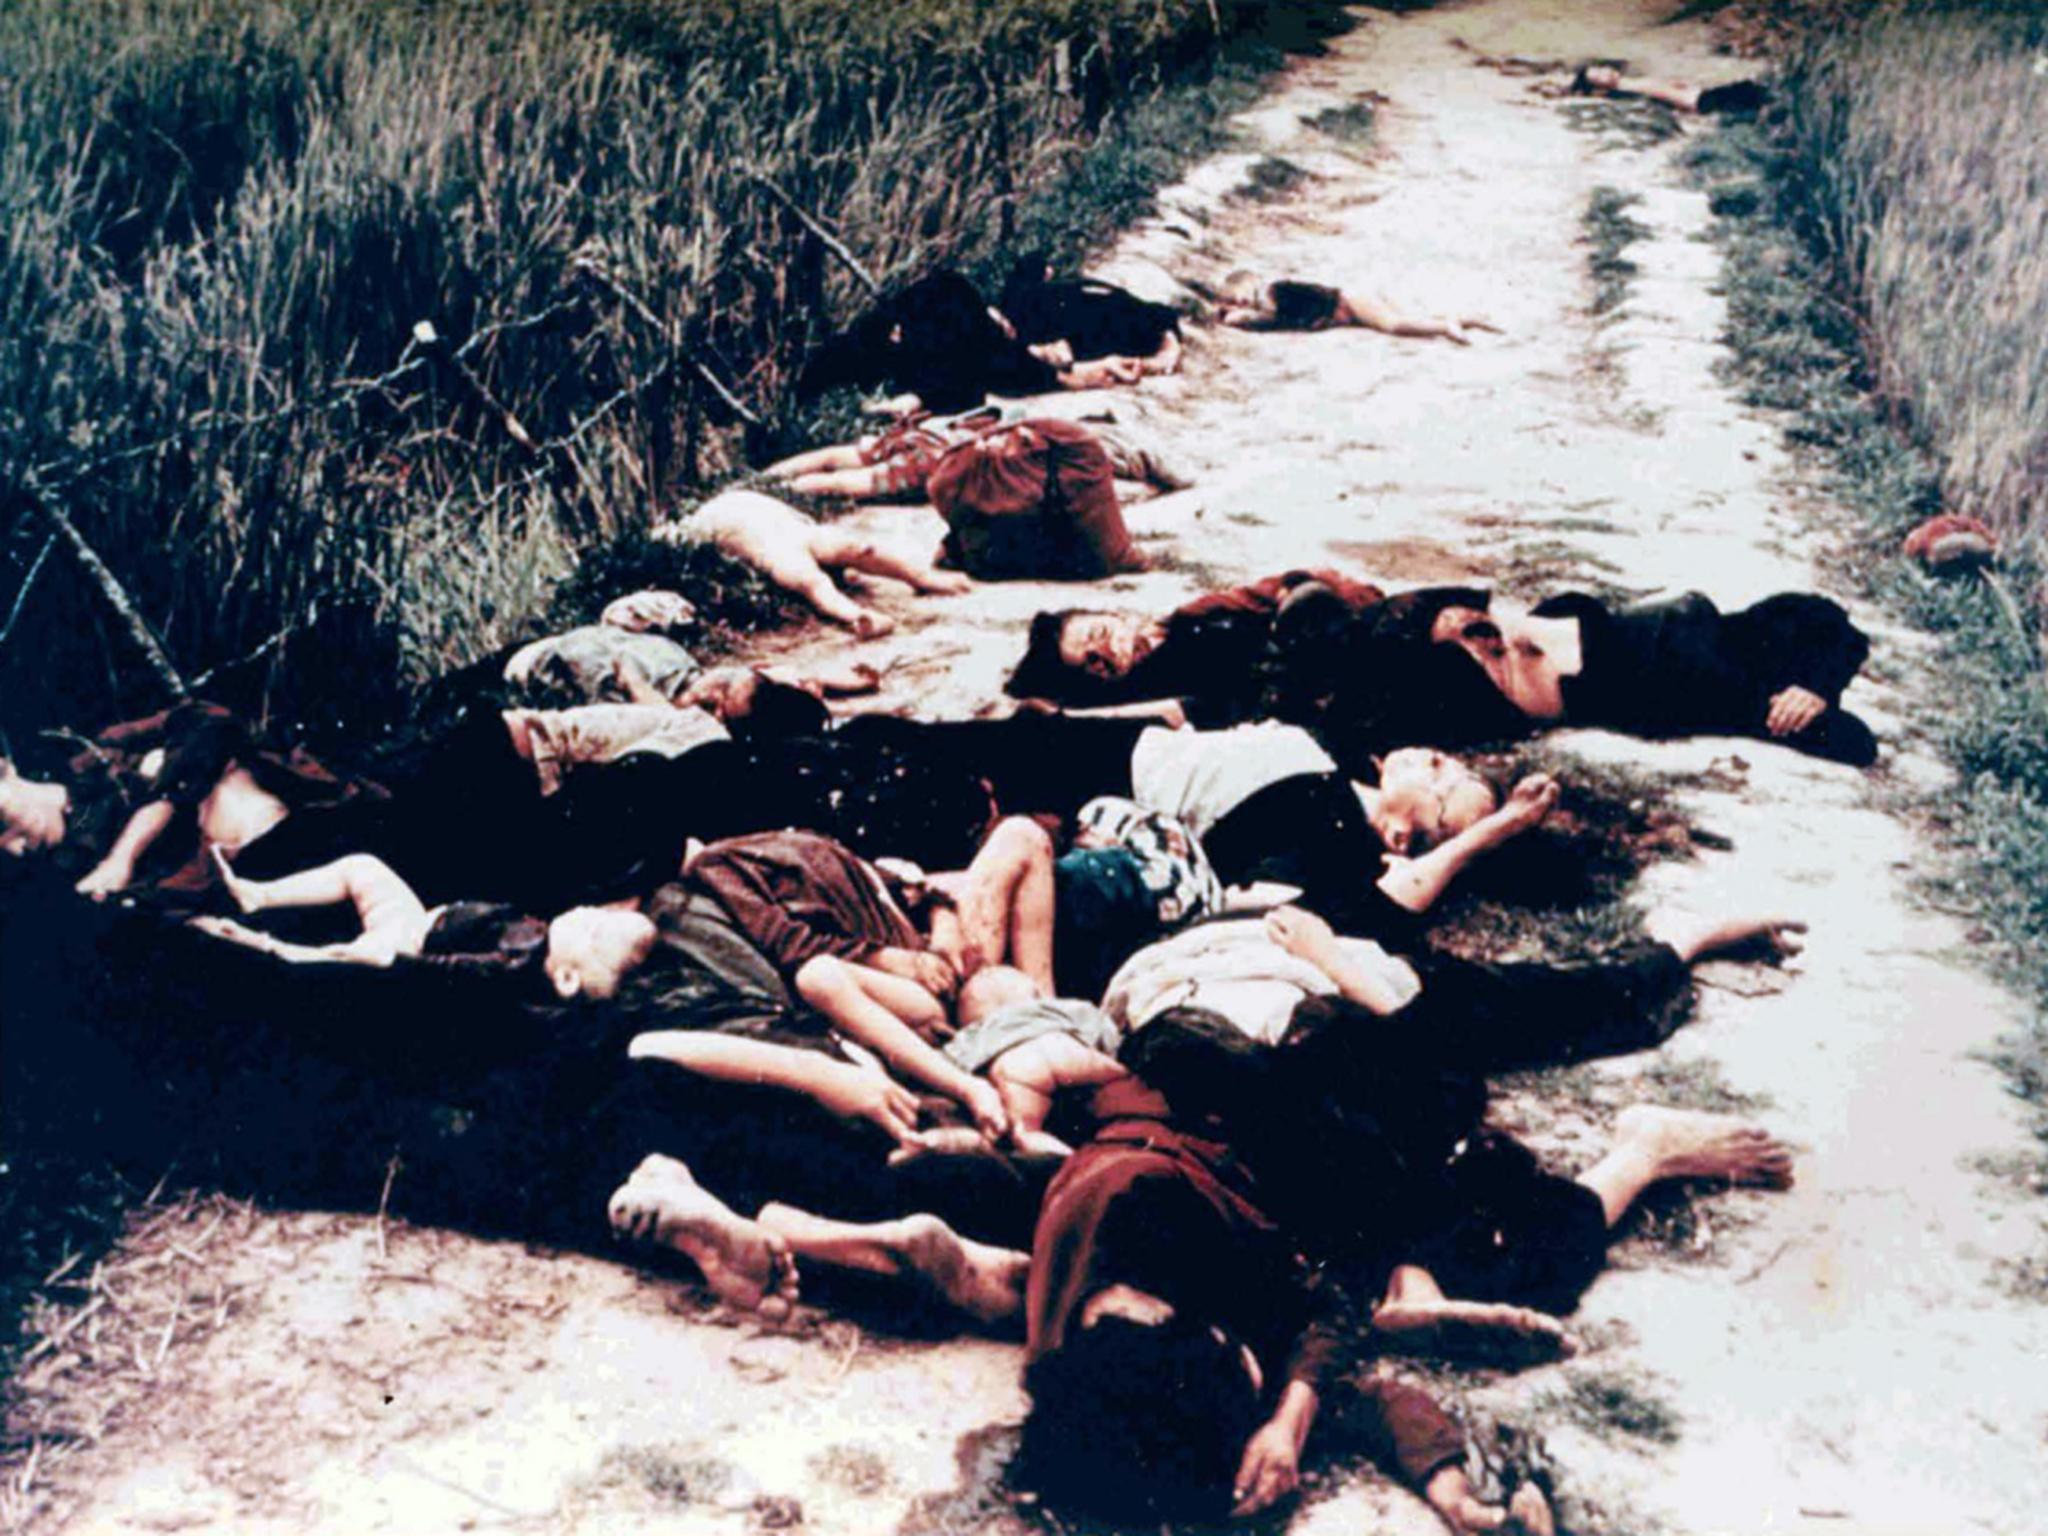 The My Lai stories seared Hersh’s writing into history and brought home the brutality of the American war machine